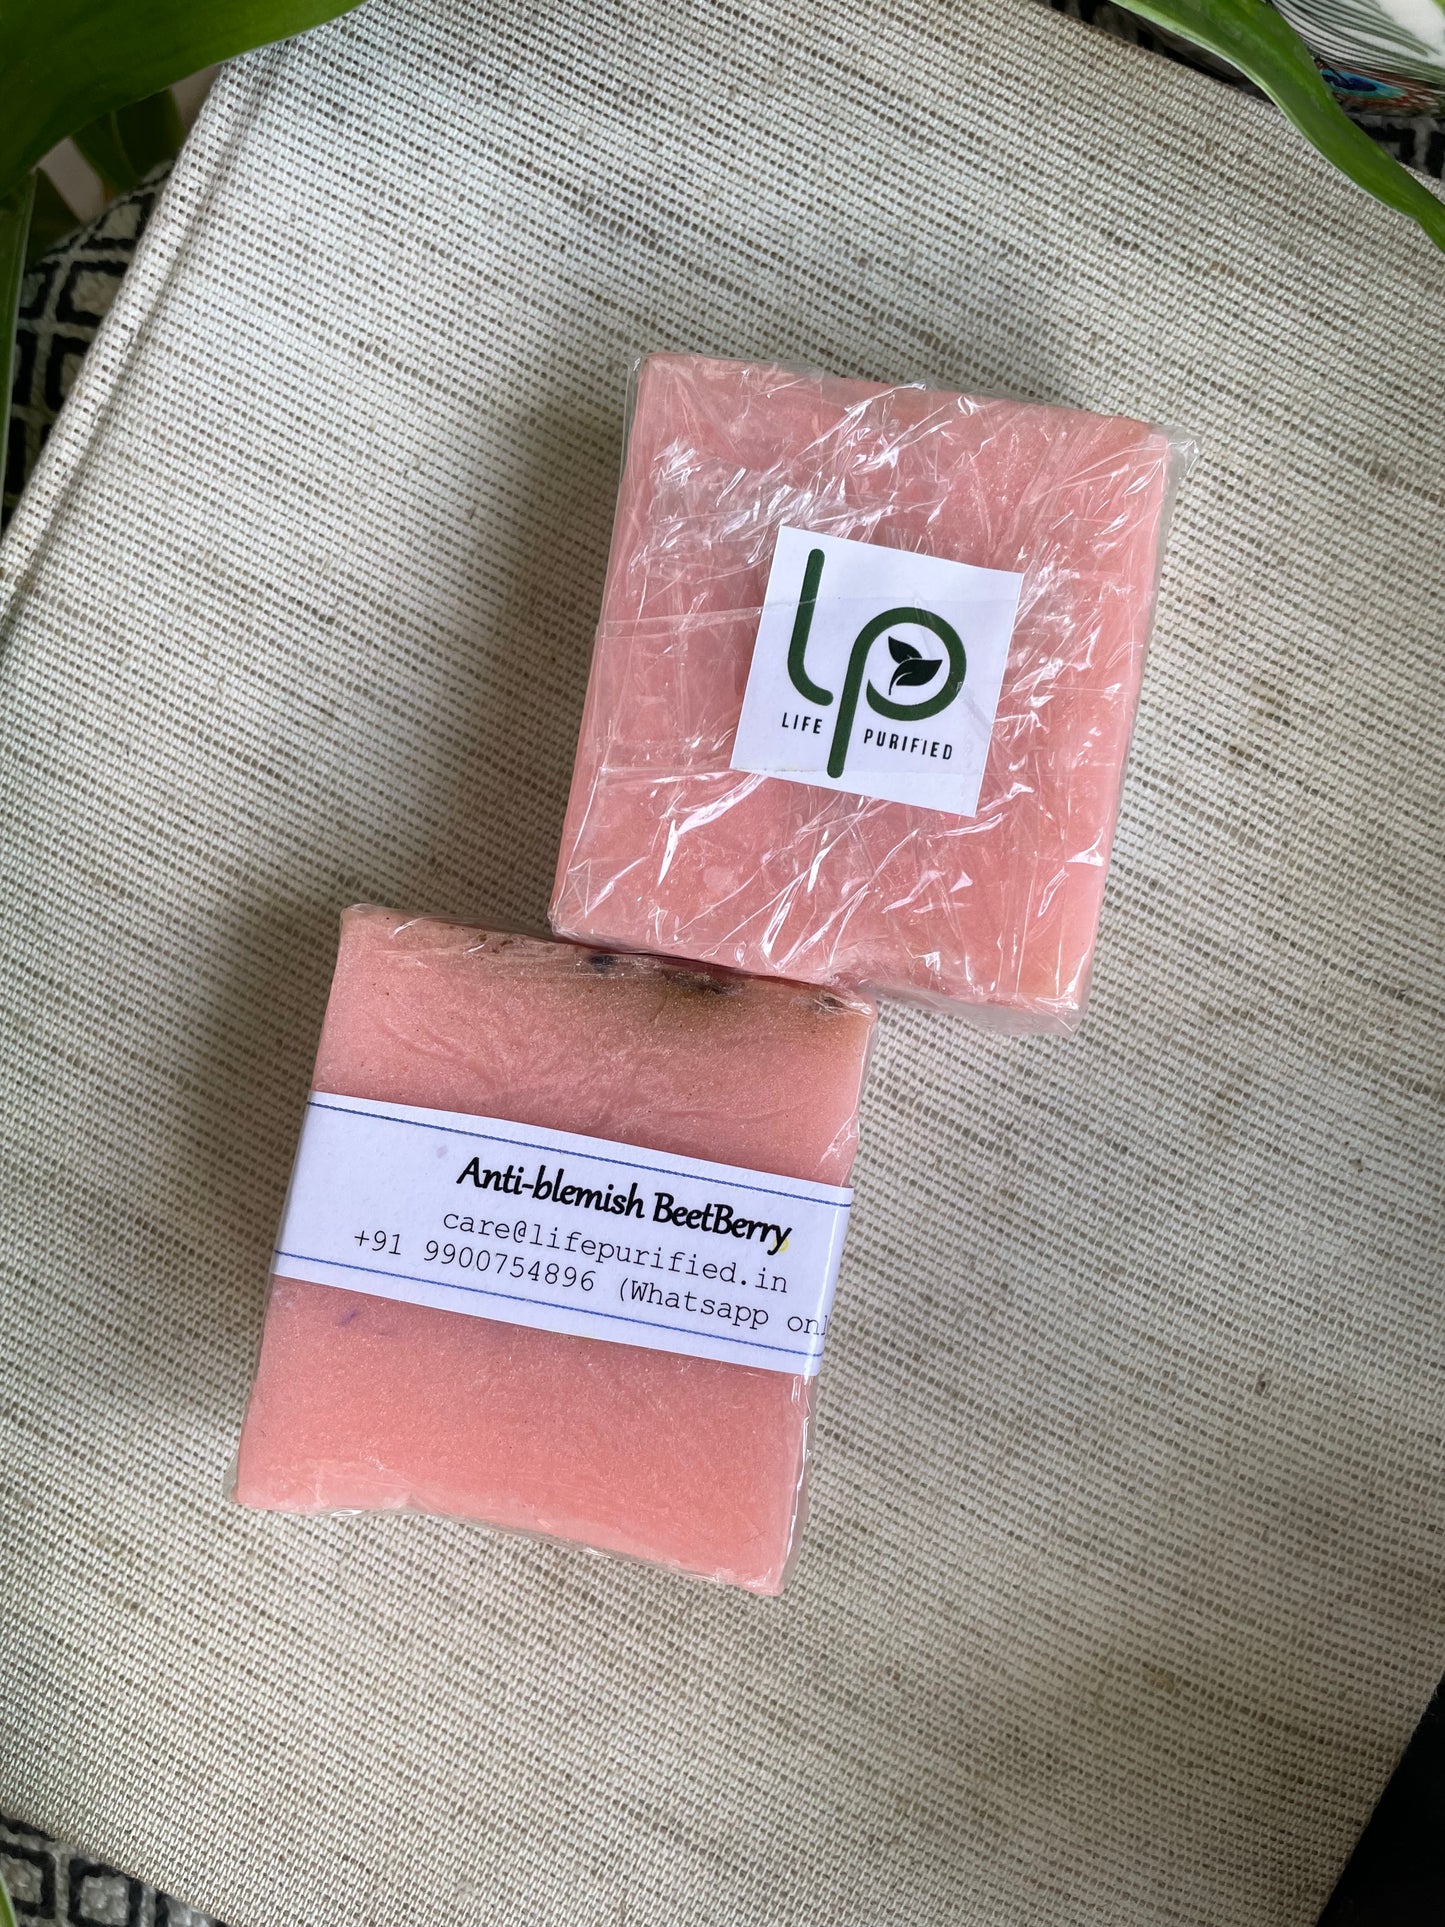 Anti-blemish BeetBerry - Specialty Soap